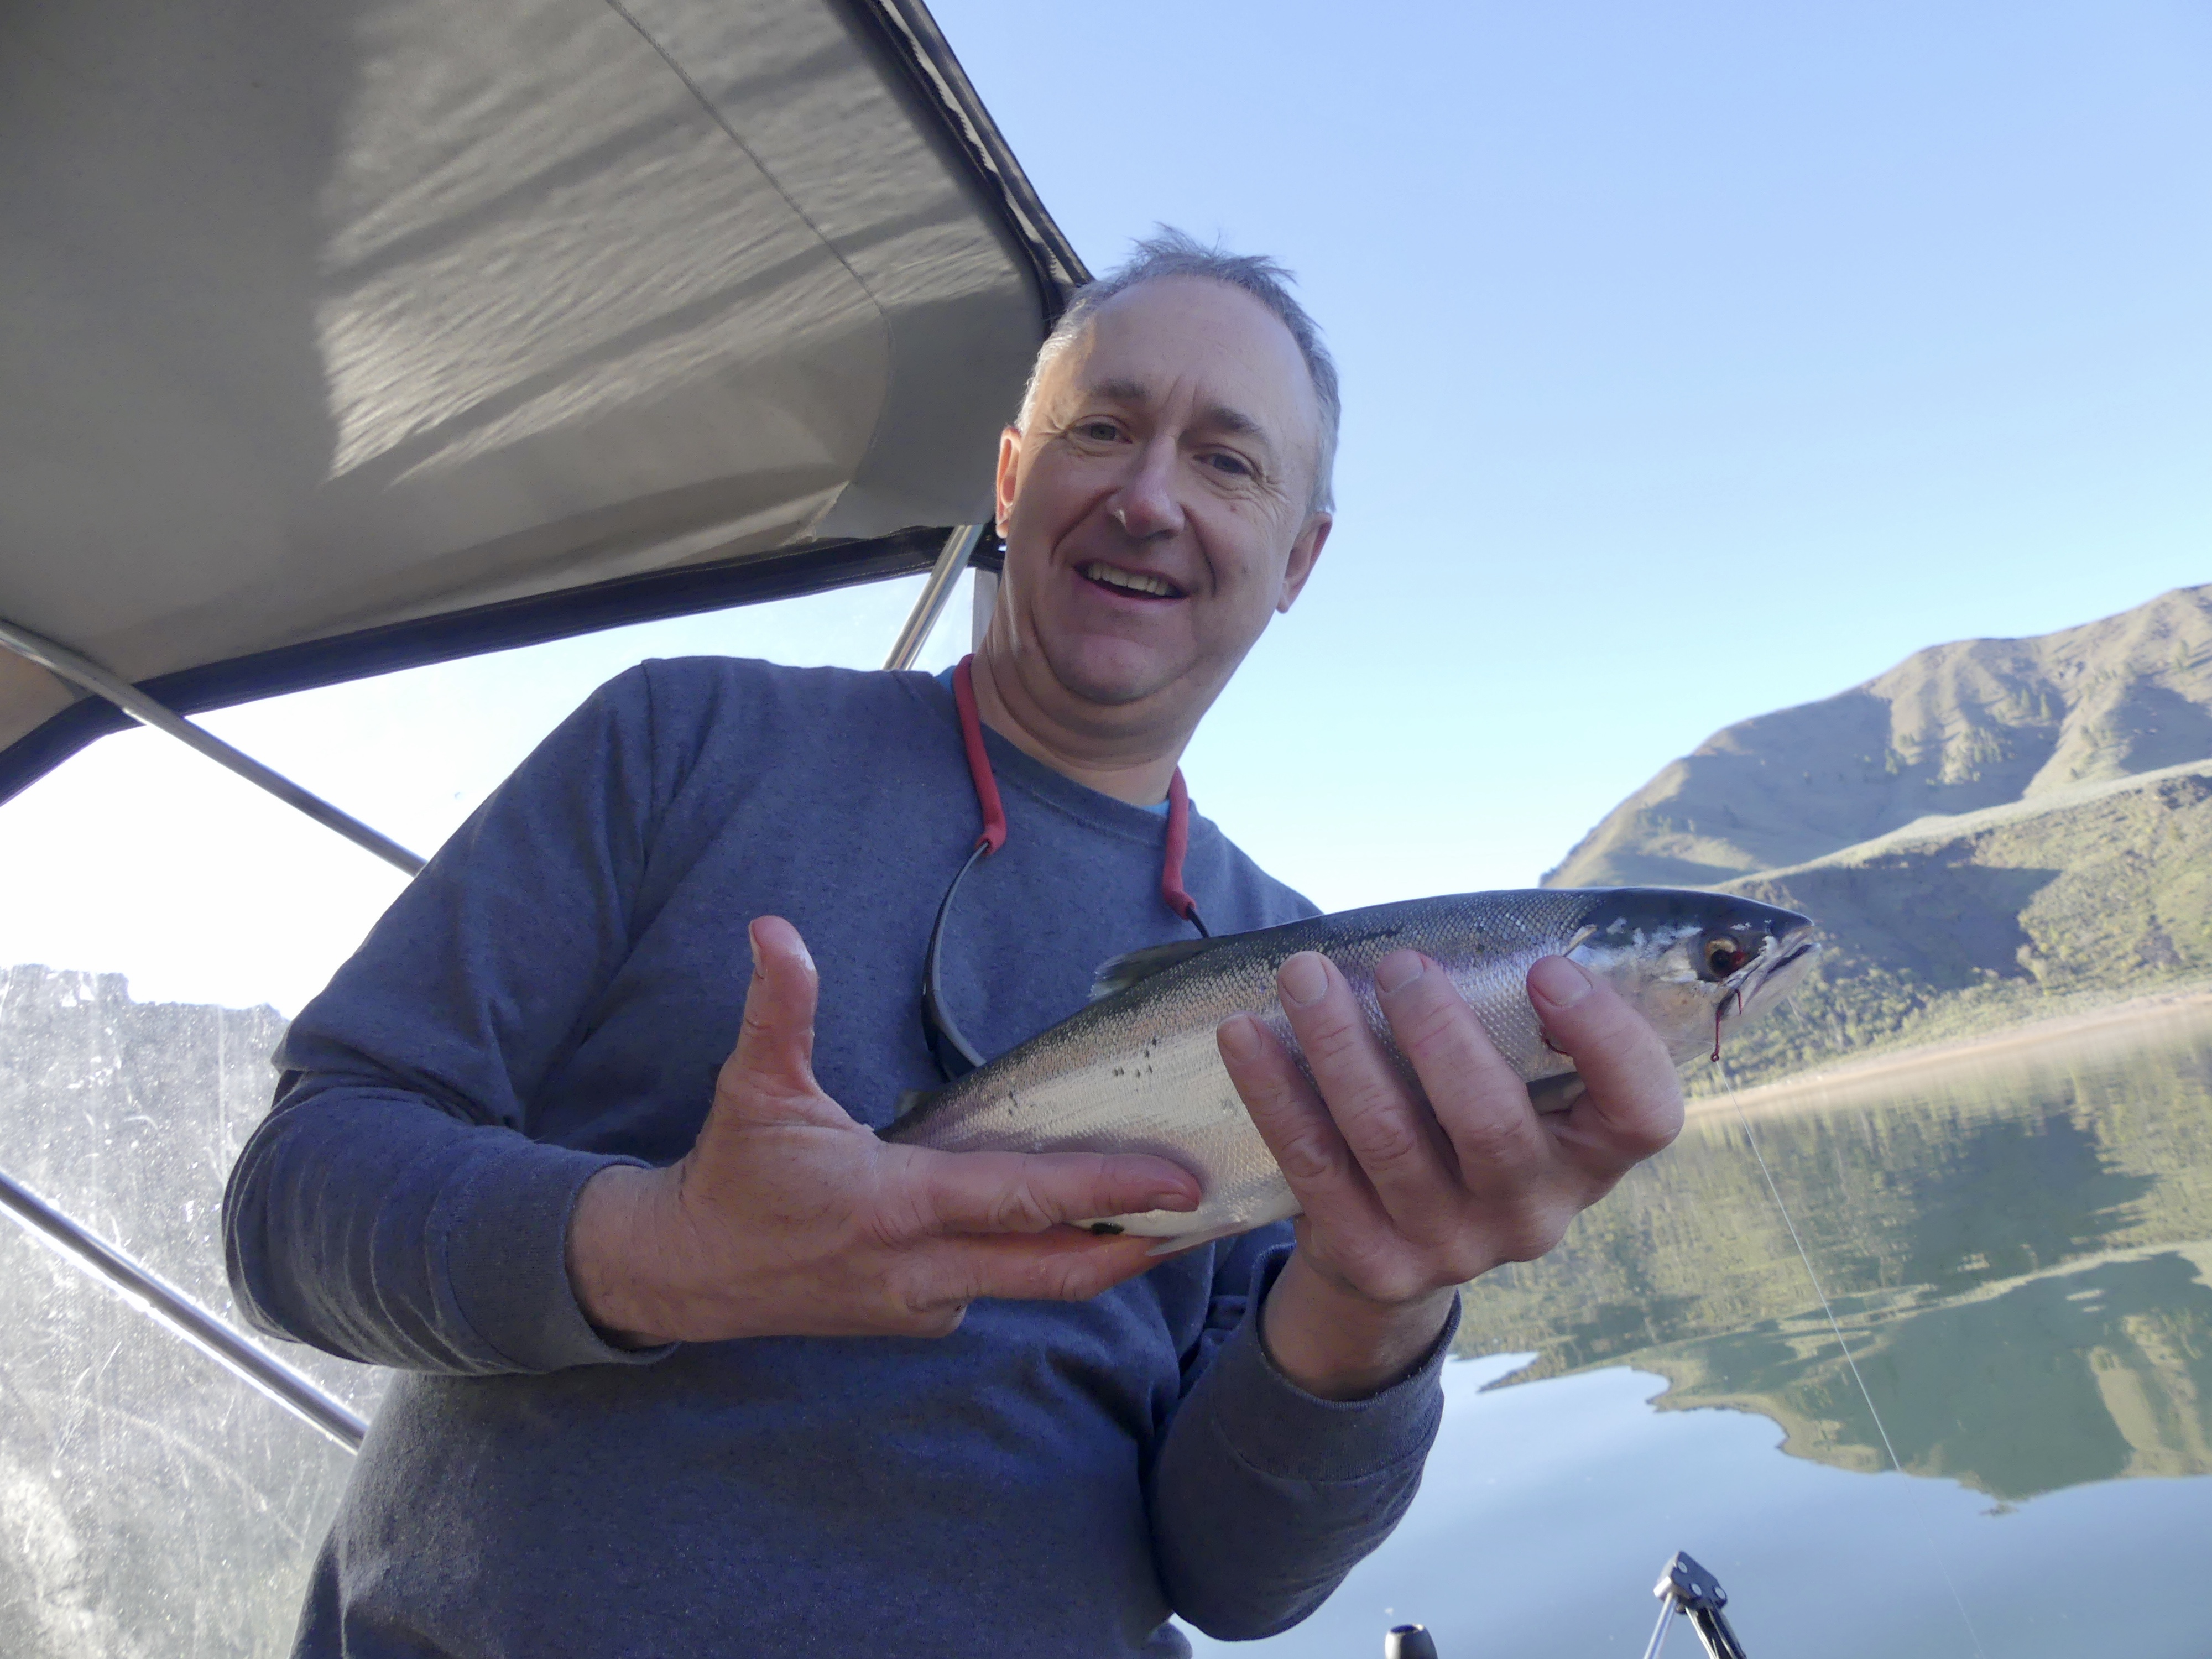 Fish for silver trout at Lucky Peak, Arrowrock reservoirs